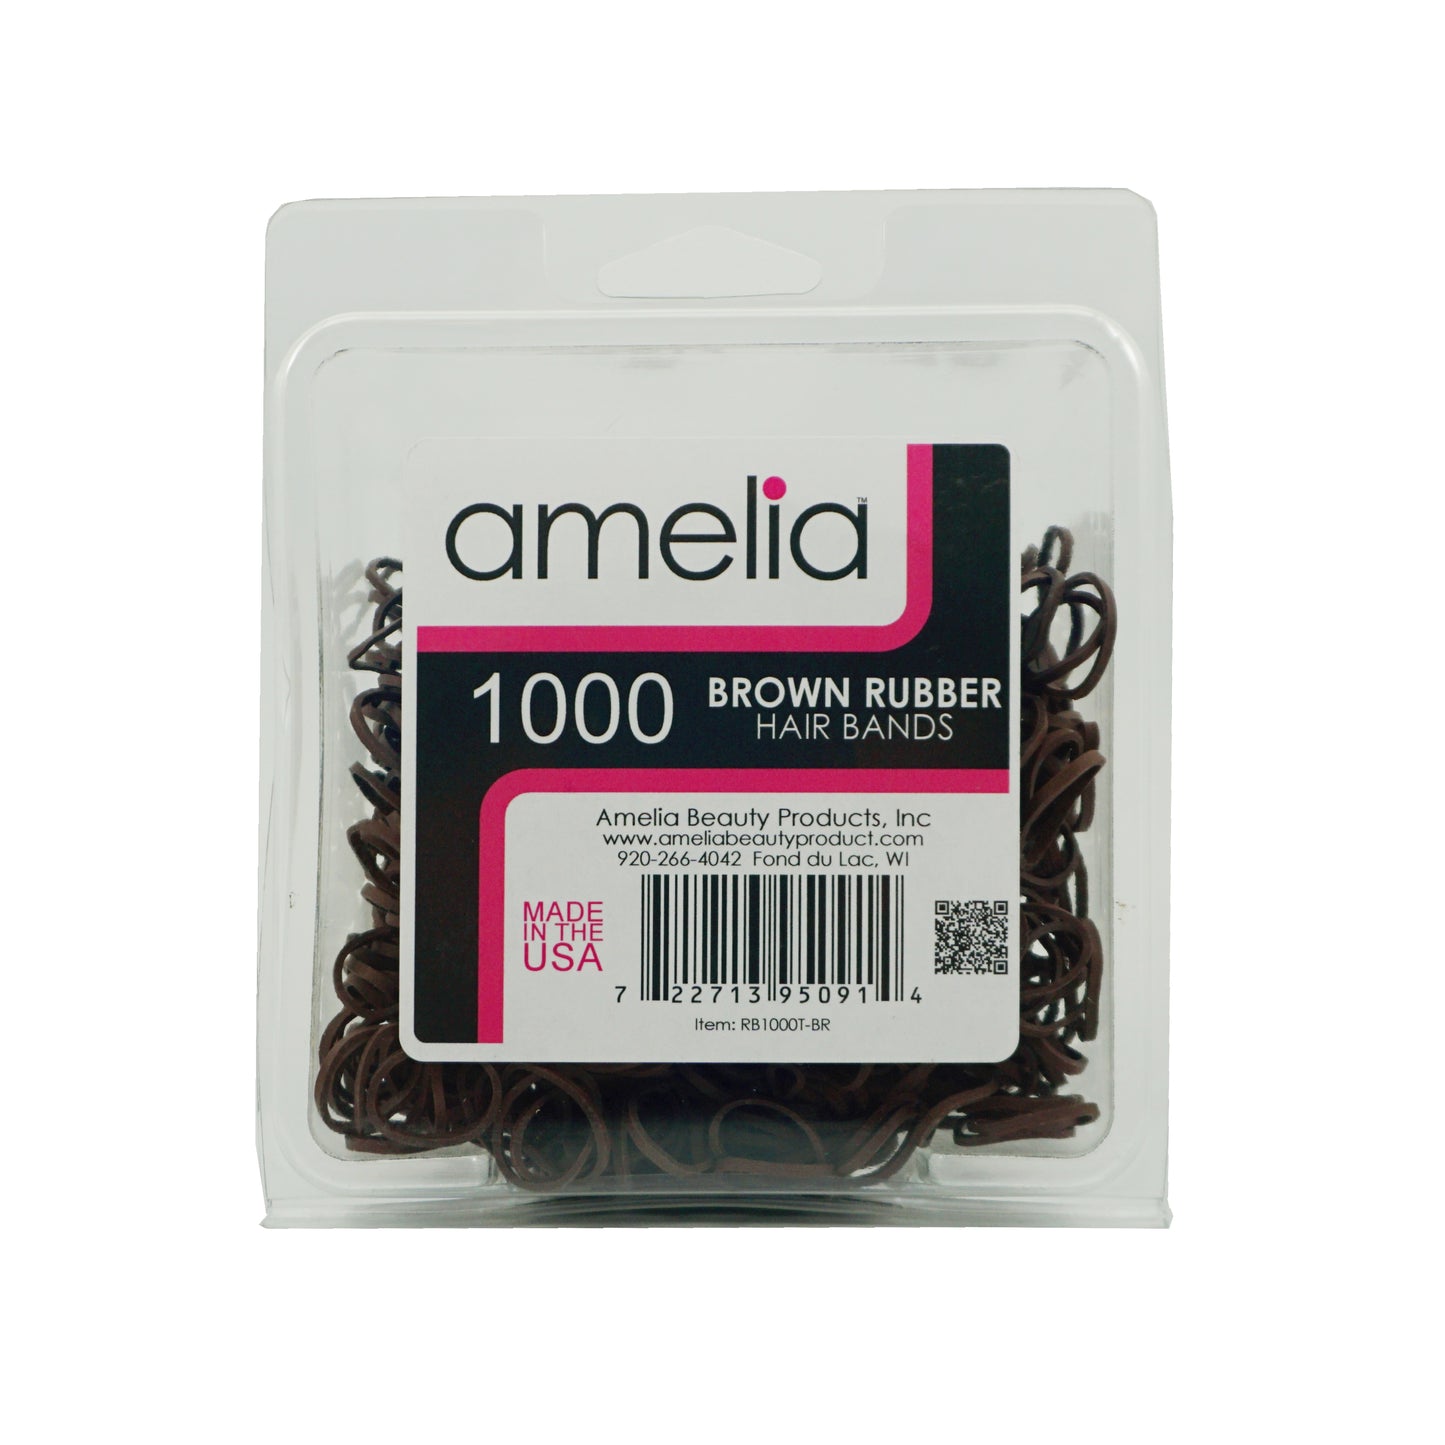 Amelia Beauty | 1/2in, Brown, Elastic Rubber Band Pony Tail Holders | Made in USA, Ideal for Ponytails, Braids, Twists, Dreadlocks, Styling Accessories for Women, Men and Girls | 1000 Pack